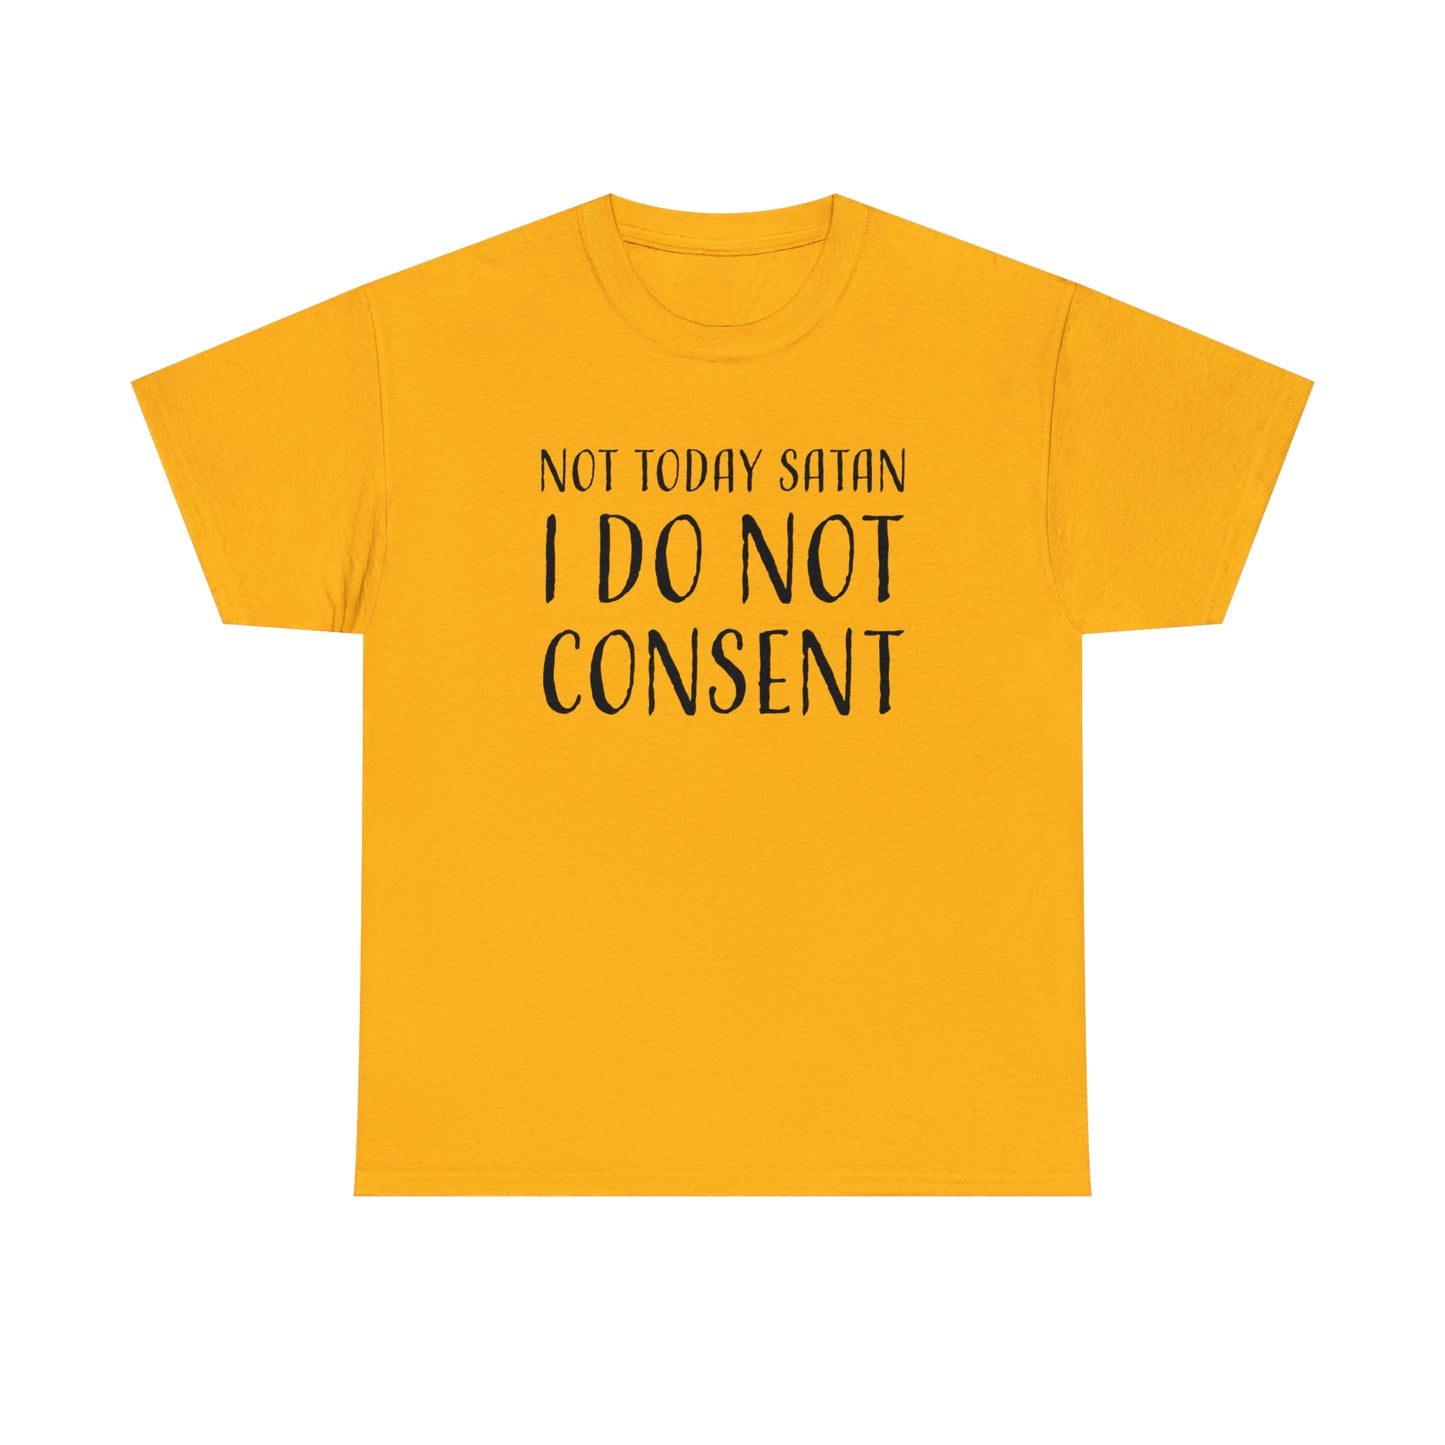 I Do Not Consent T-Shirt for Not Today Satan TShirt For Non Compliance T Shirt For Disapprove Shirt For Rebel Gift